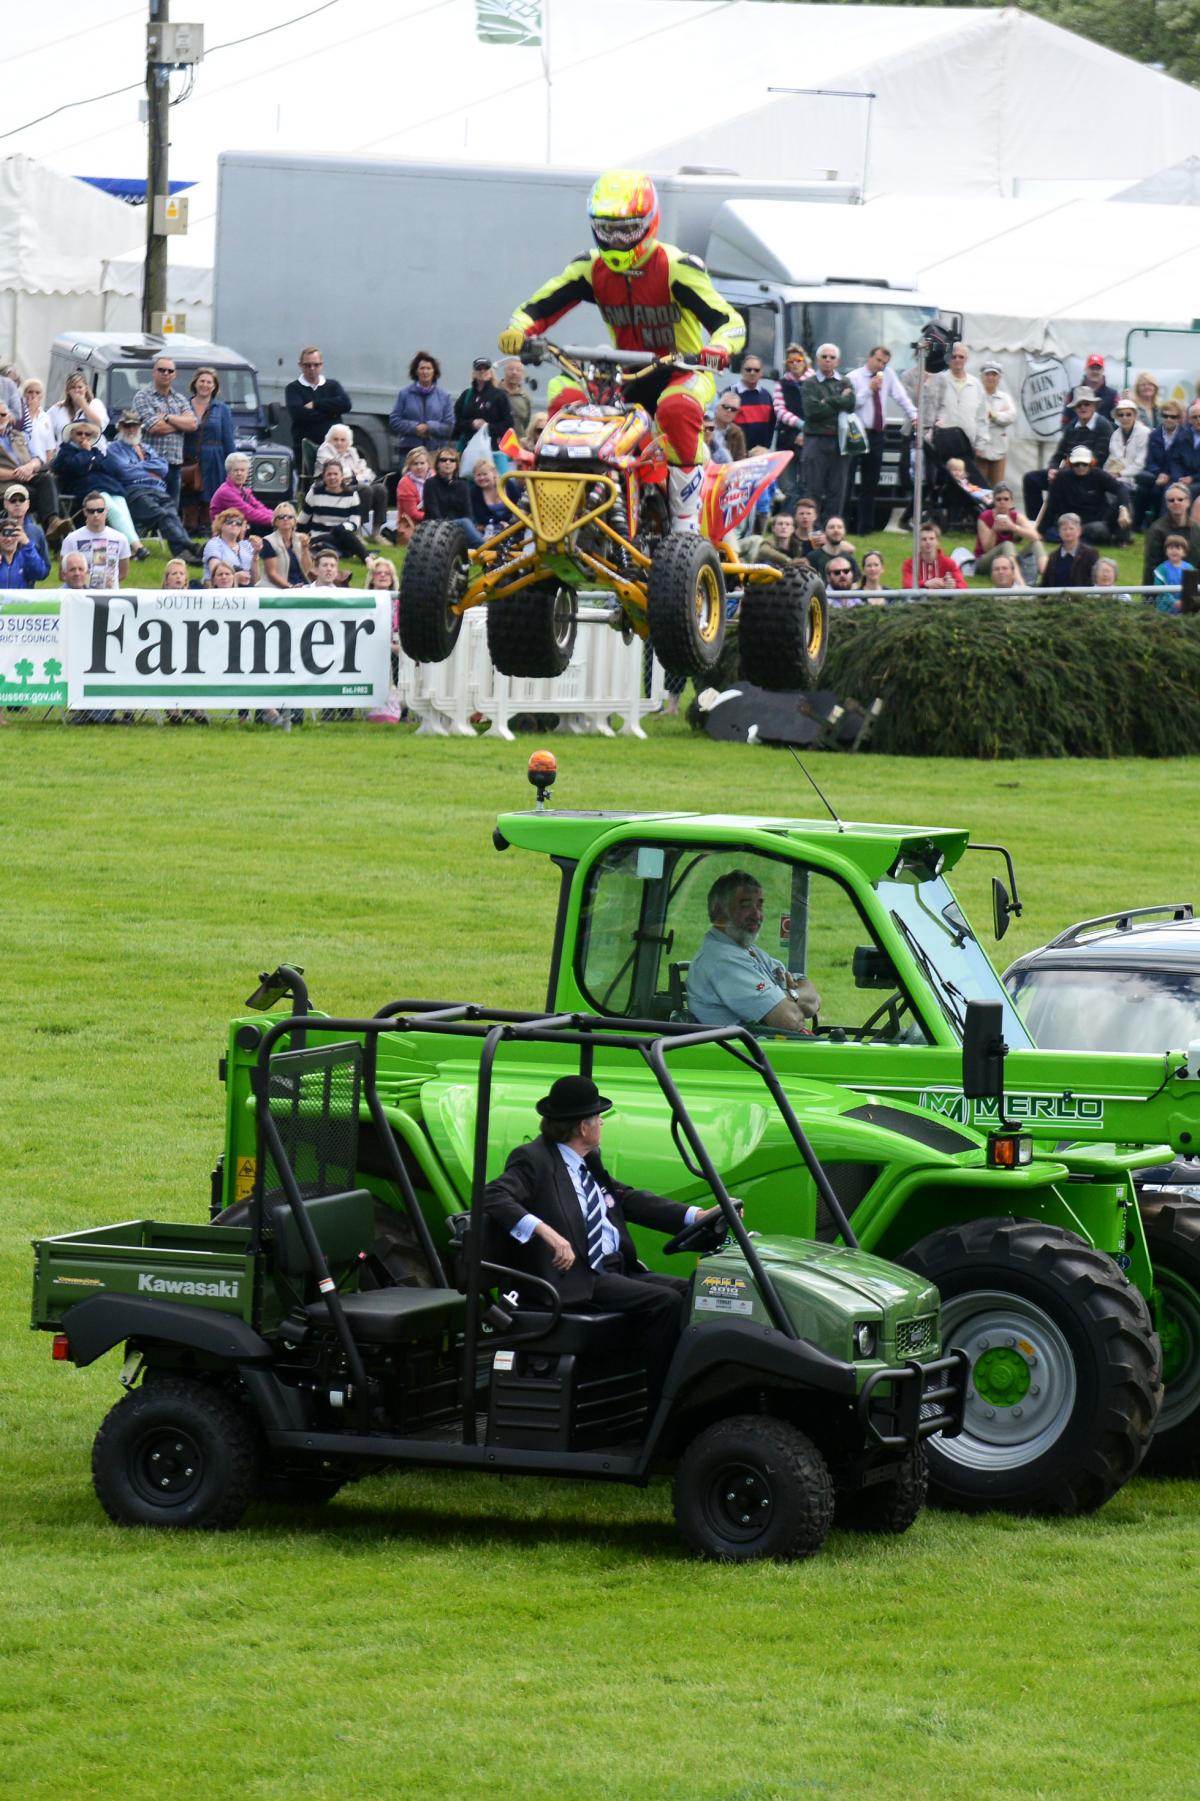 ORGANISERS have branded this year’s South of England show a “huge success” after 71,000 people flocked to the three-day event.
Punters enjoyed everything from top-level show jumping to pig agility on the final day on Saturday as the sun blessed the